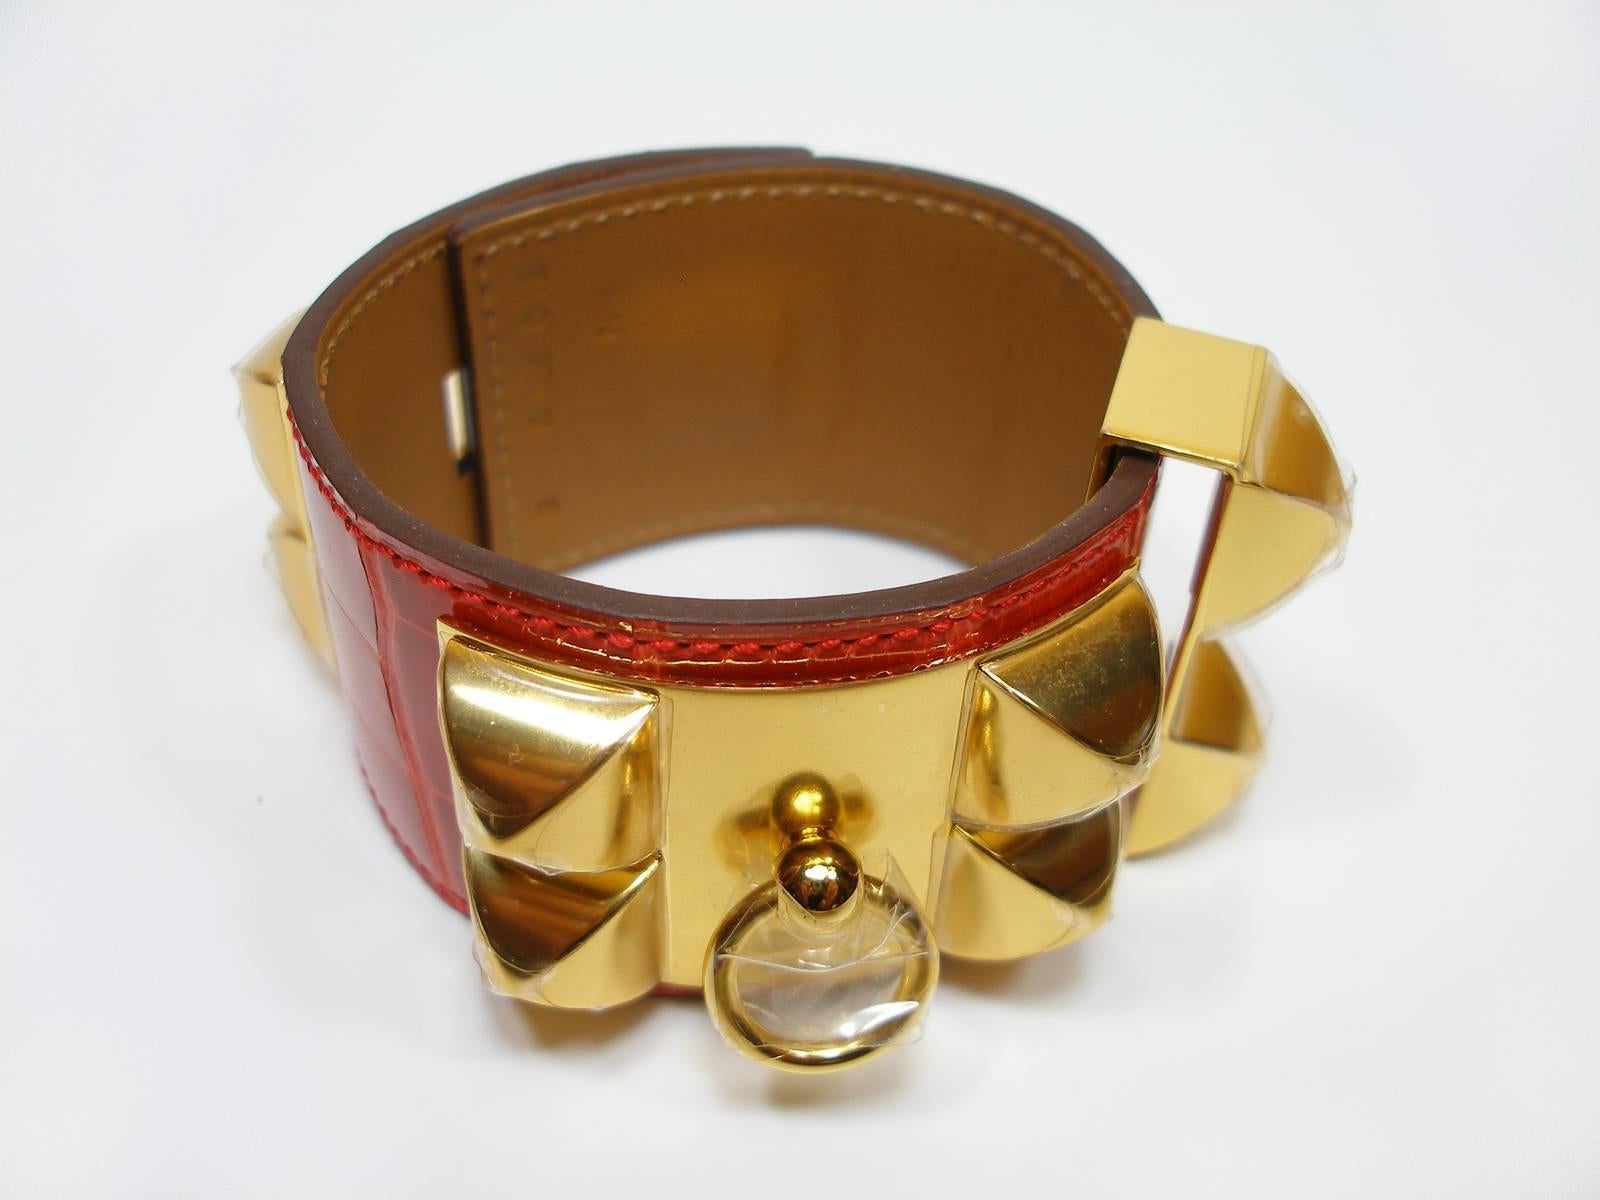 Hermès bracelet in Croc leather 
Gold plated hardware
Color : Rouge Géranium ( rouge / orangé )
Small Size 
Adjustable
4 possibilities 16 cm à 19 cm or 6.29 to 7.48 inches 
Year X - Production 2016 
Plastic is still on gold hardware
Its comes with